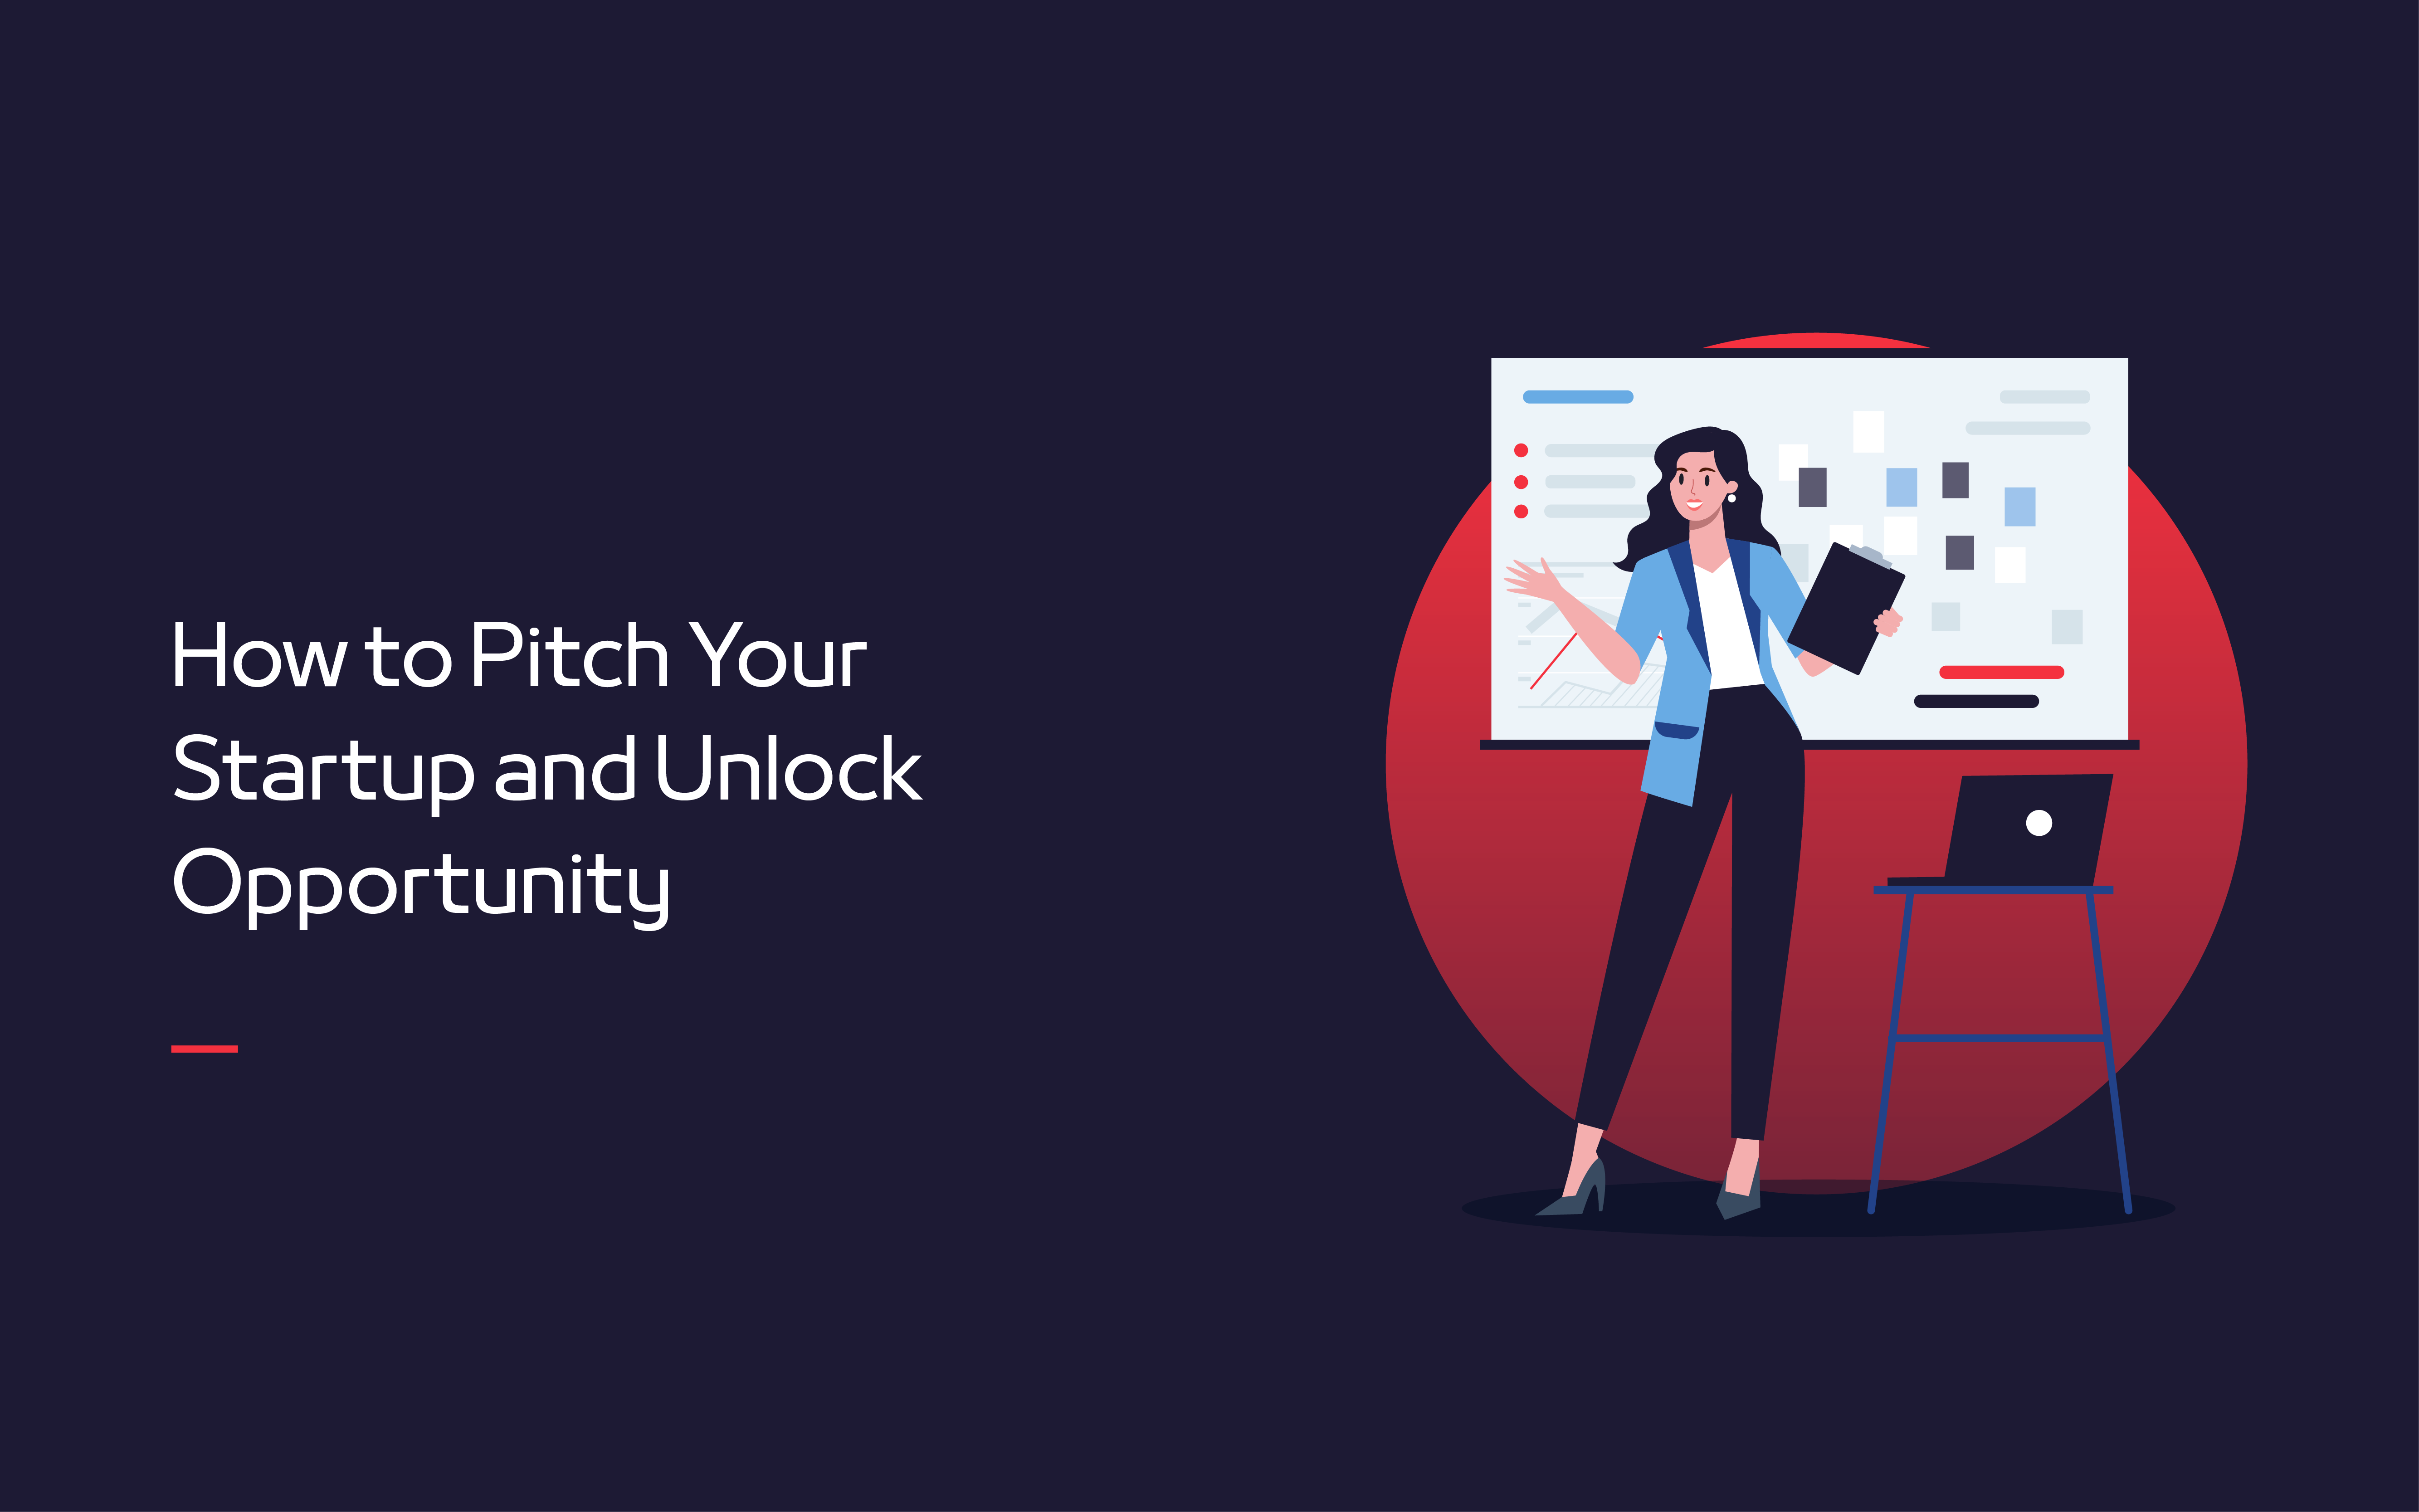 How to Pitch Your Startup and Unlock Opportunity